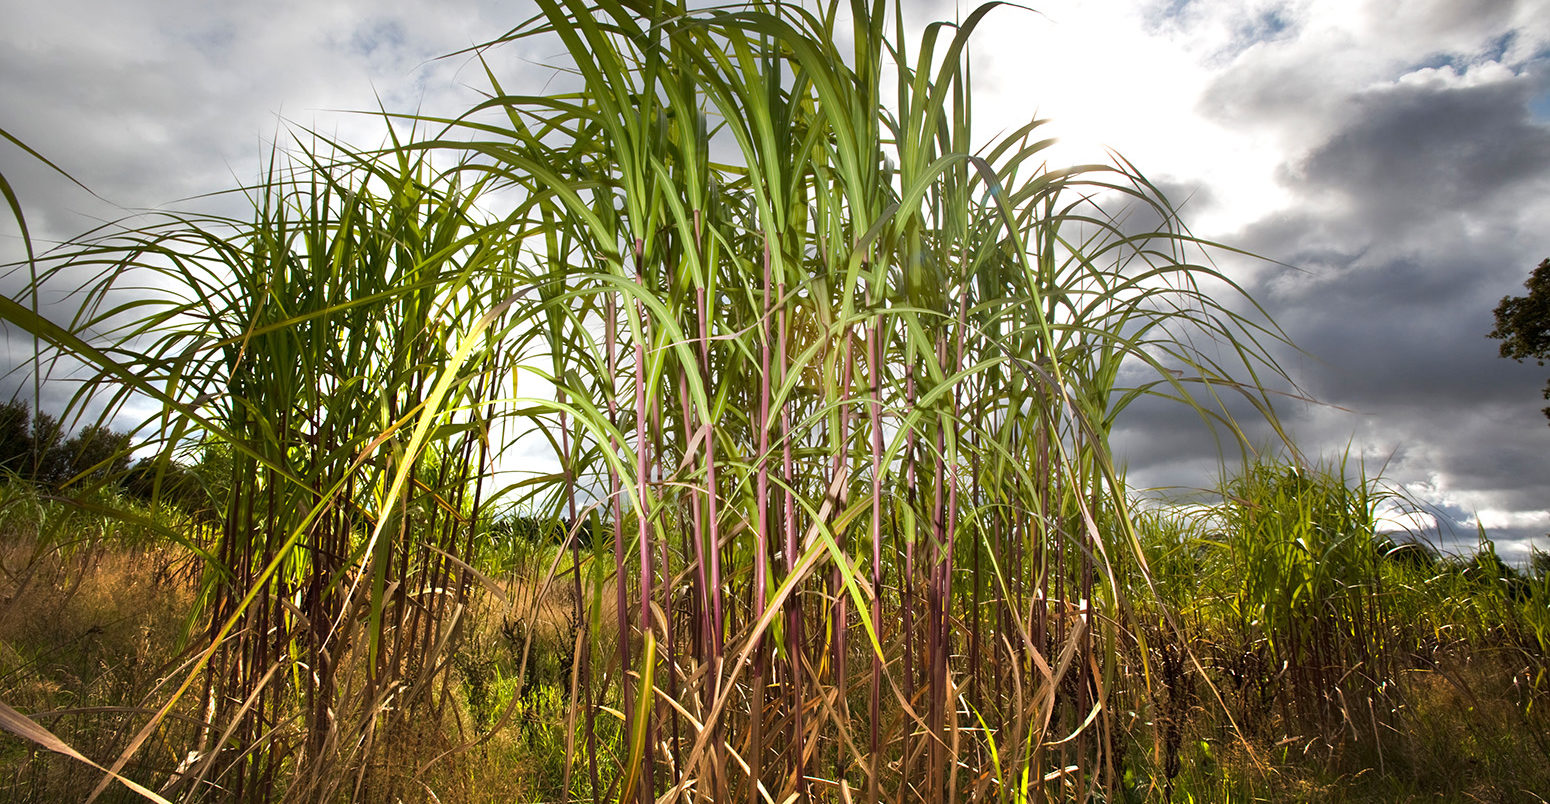 A crop of Elephant Grass (Miscanthus) growing in a field in Worcestershire, England, UK. Credit: John James / Alamy Stock Photo. BDPD0M